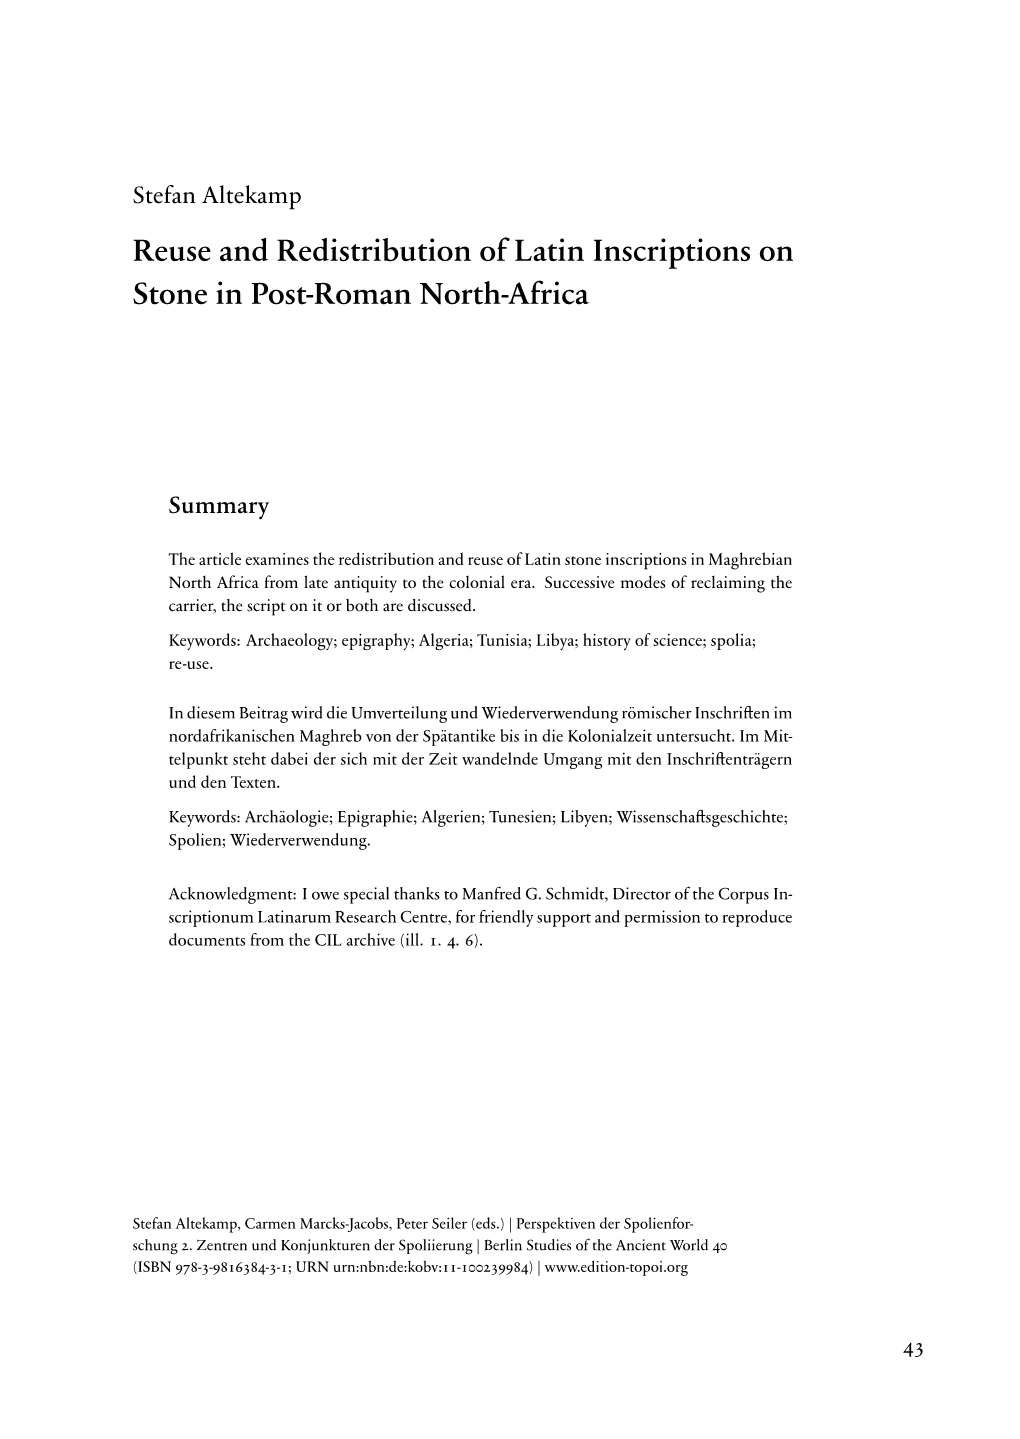 Reuse and Redistribution of Latin Inscriptions on Stone in Post-Roman North-Africa